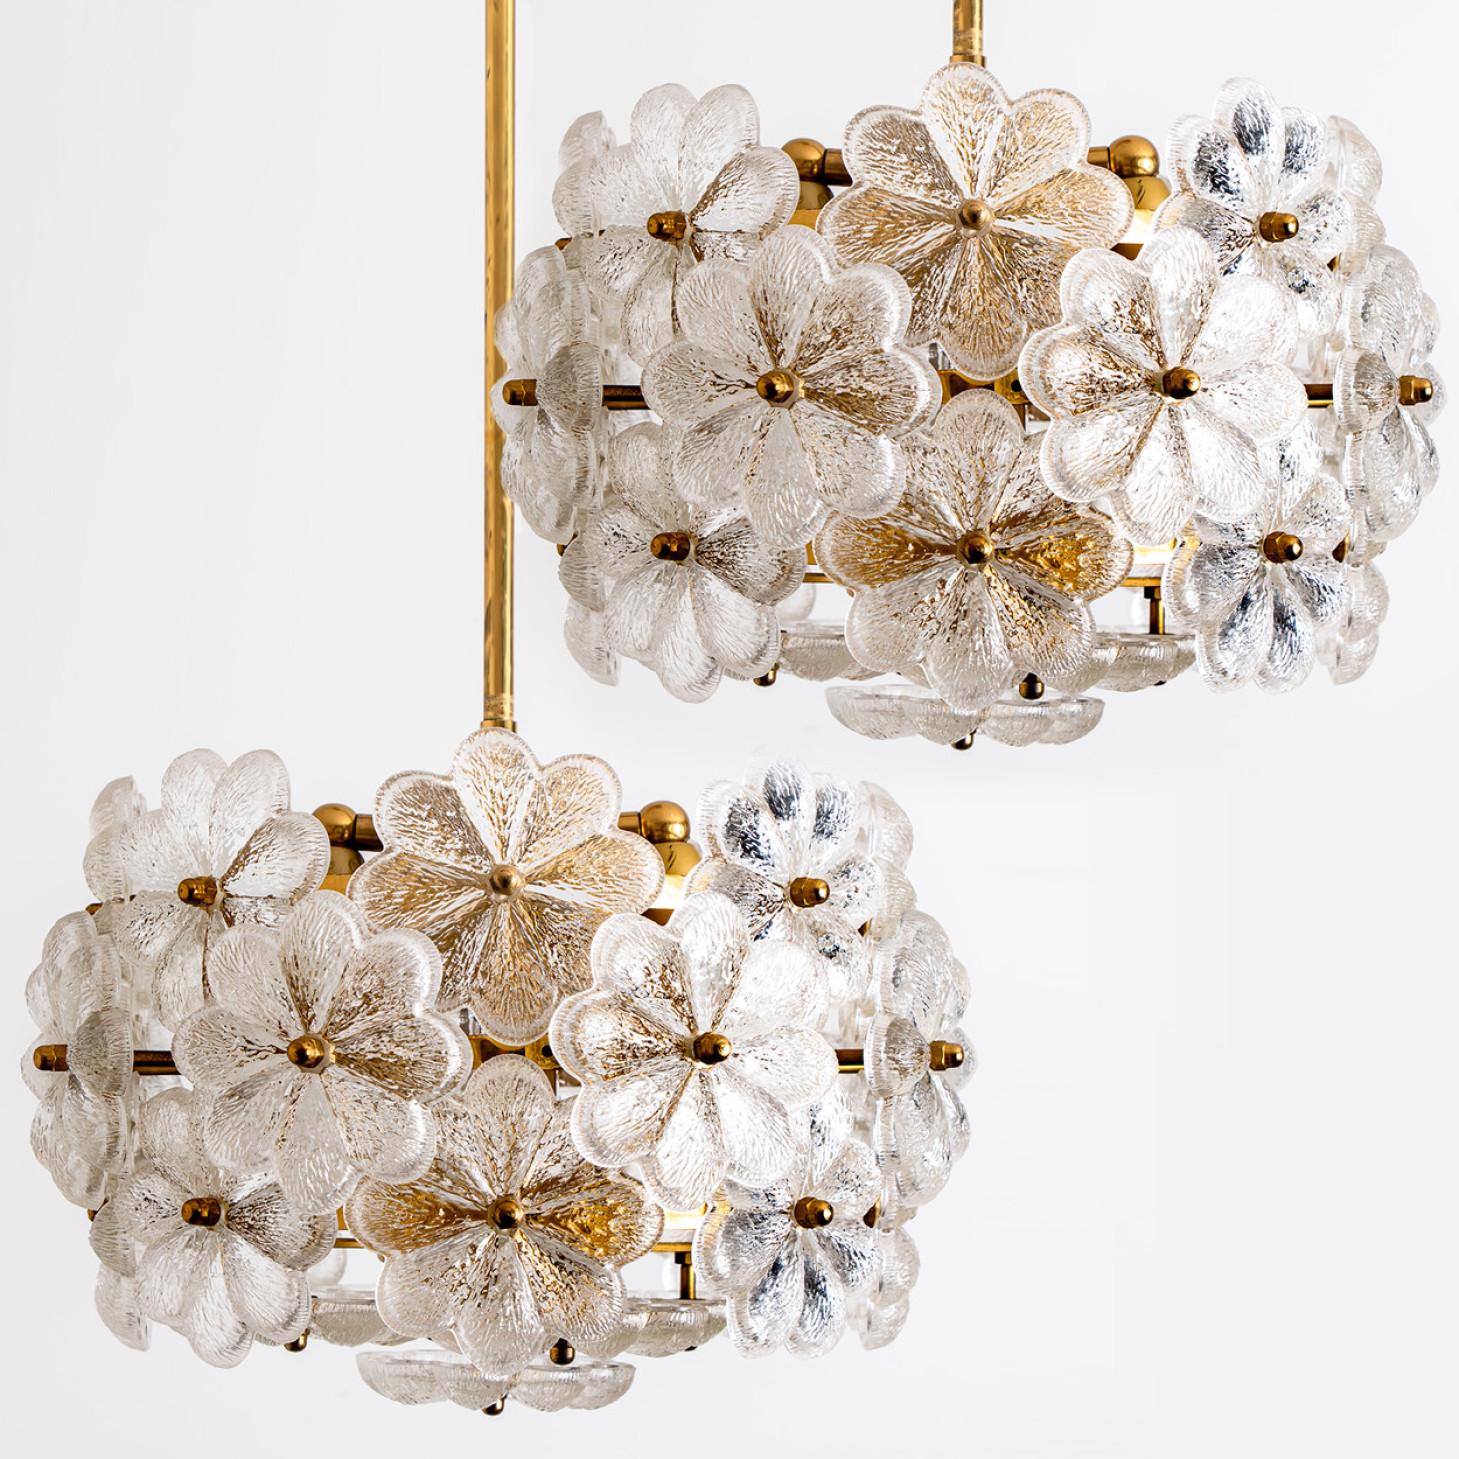 Stunning pair of chandeliers with crystal flower glass over a brass frame, made by Ernst Palme in Germany, 1970s.

High quality and in very good condition. Cleaned, well-wired and ready to use.

The chandelier requires E14 small bulbs with 40W max.